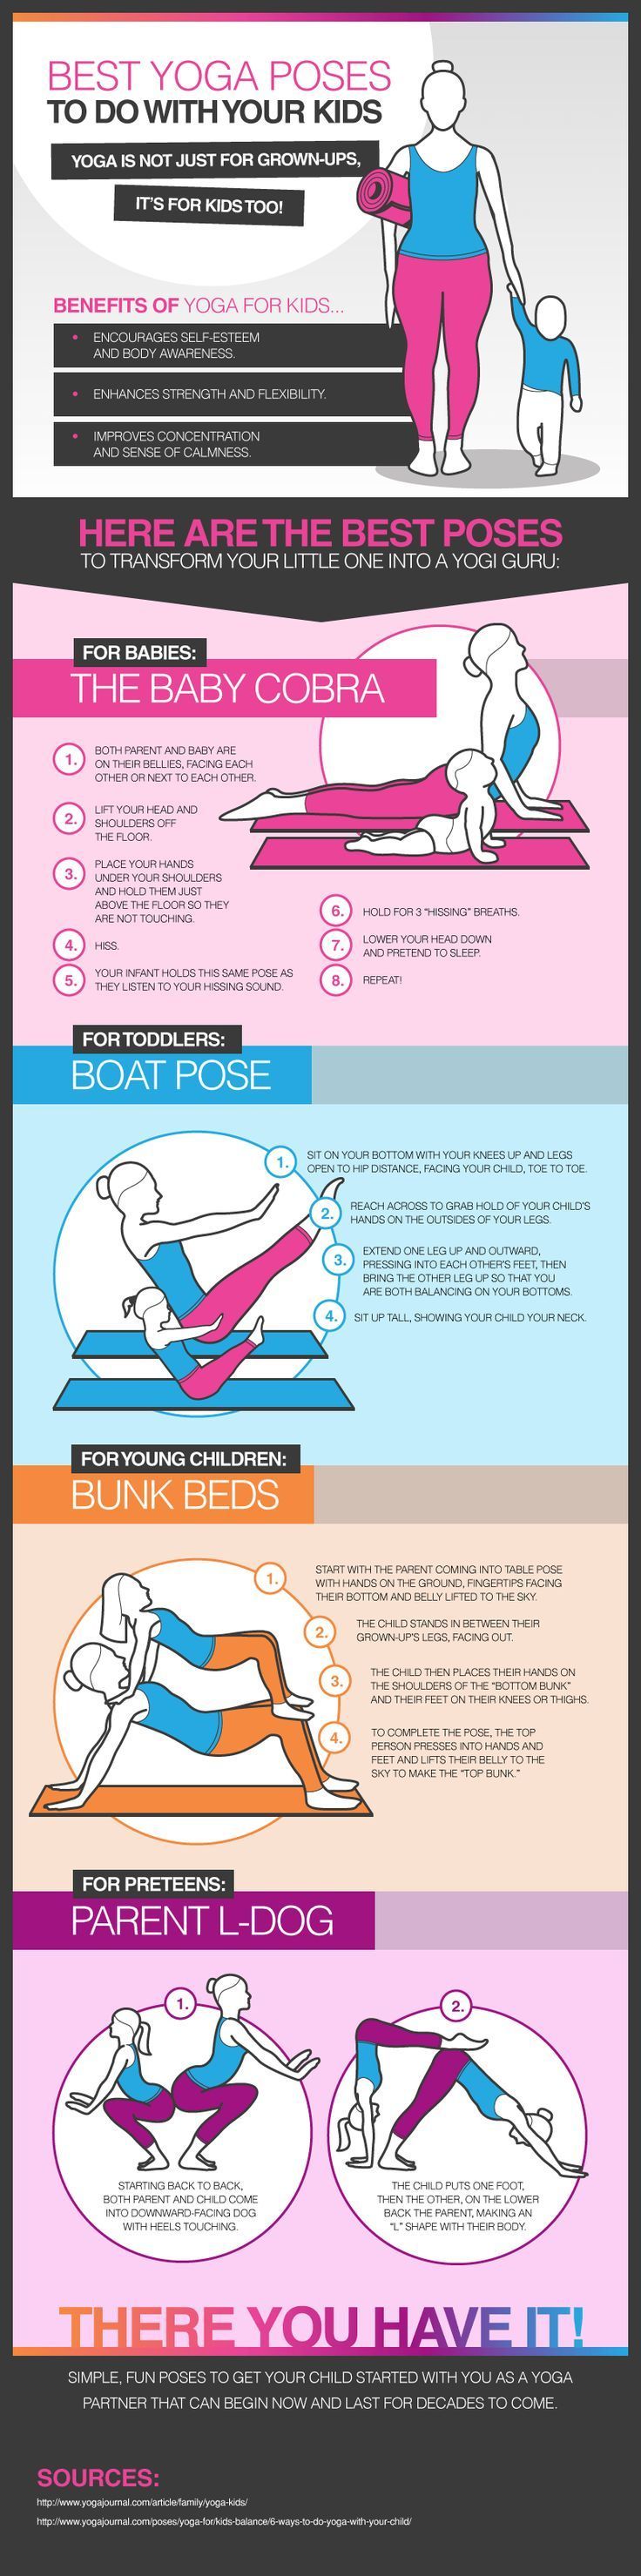 The Best Yoga Poses to do With Kids and Special Needs Kids!